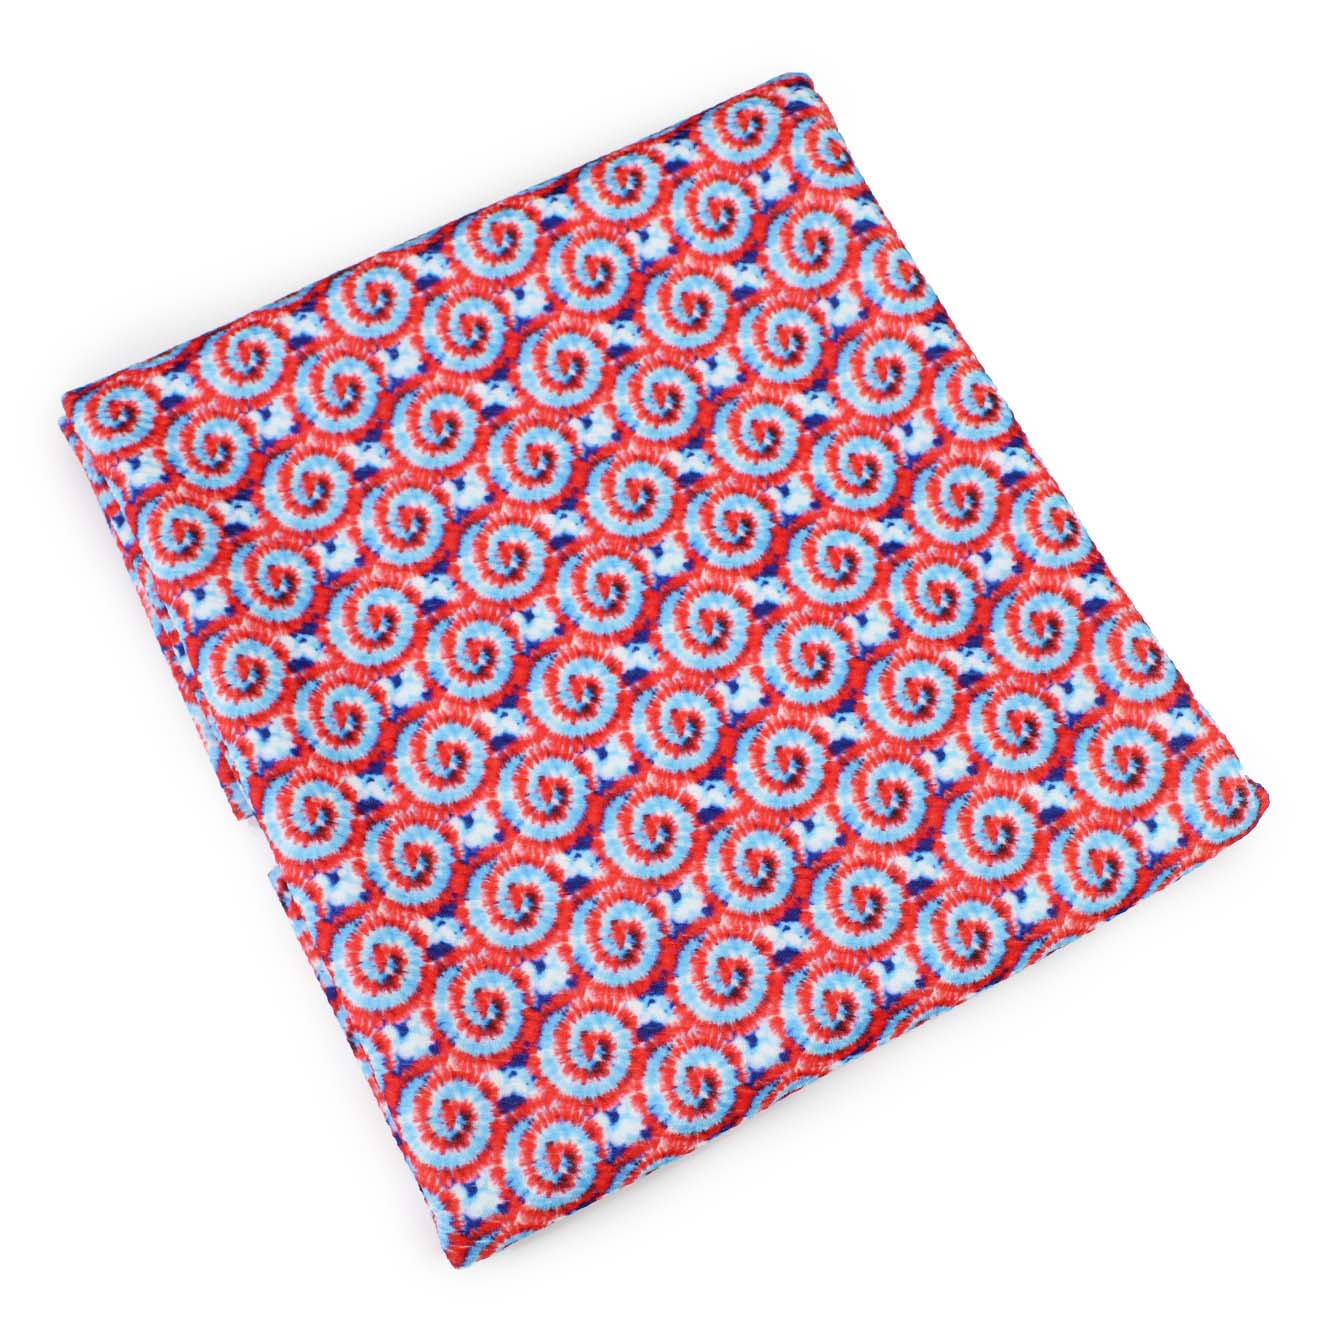 Red, White and Blue Tie Dye Bullet Fabric